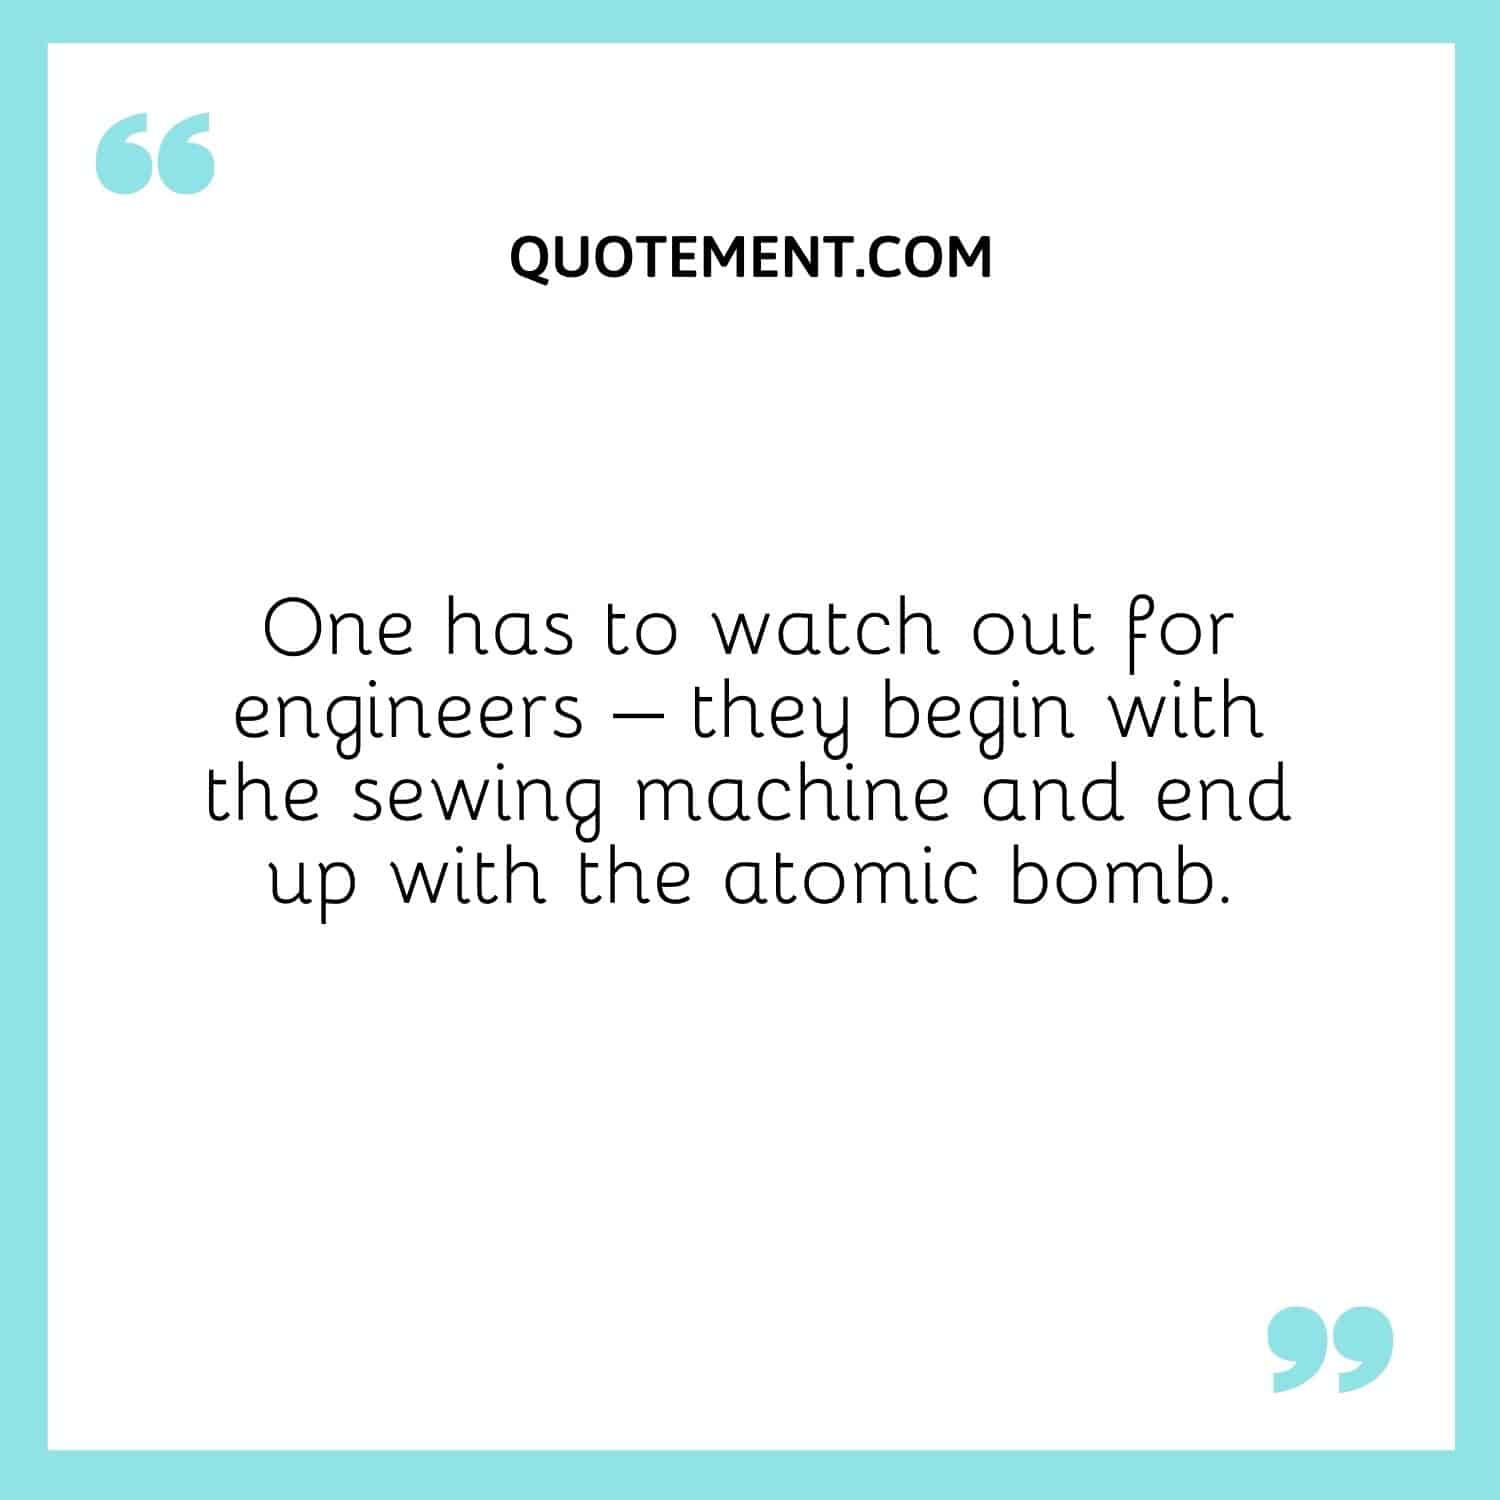 One has to watch out for engineers – they begin with the sewing machine and end up with the atomic bomb.